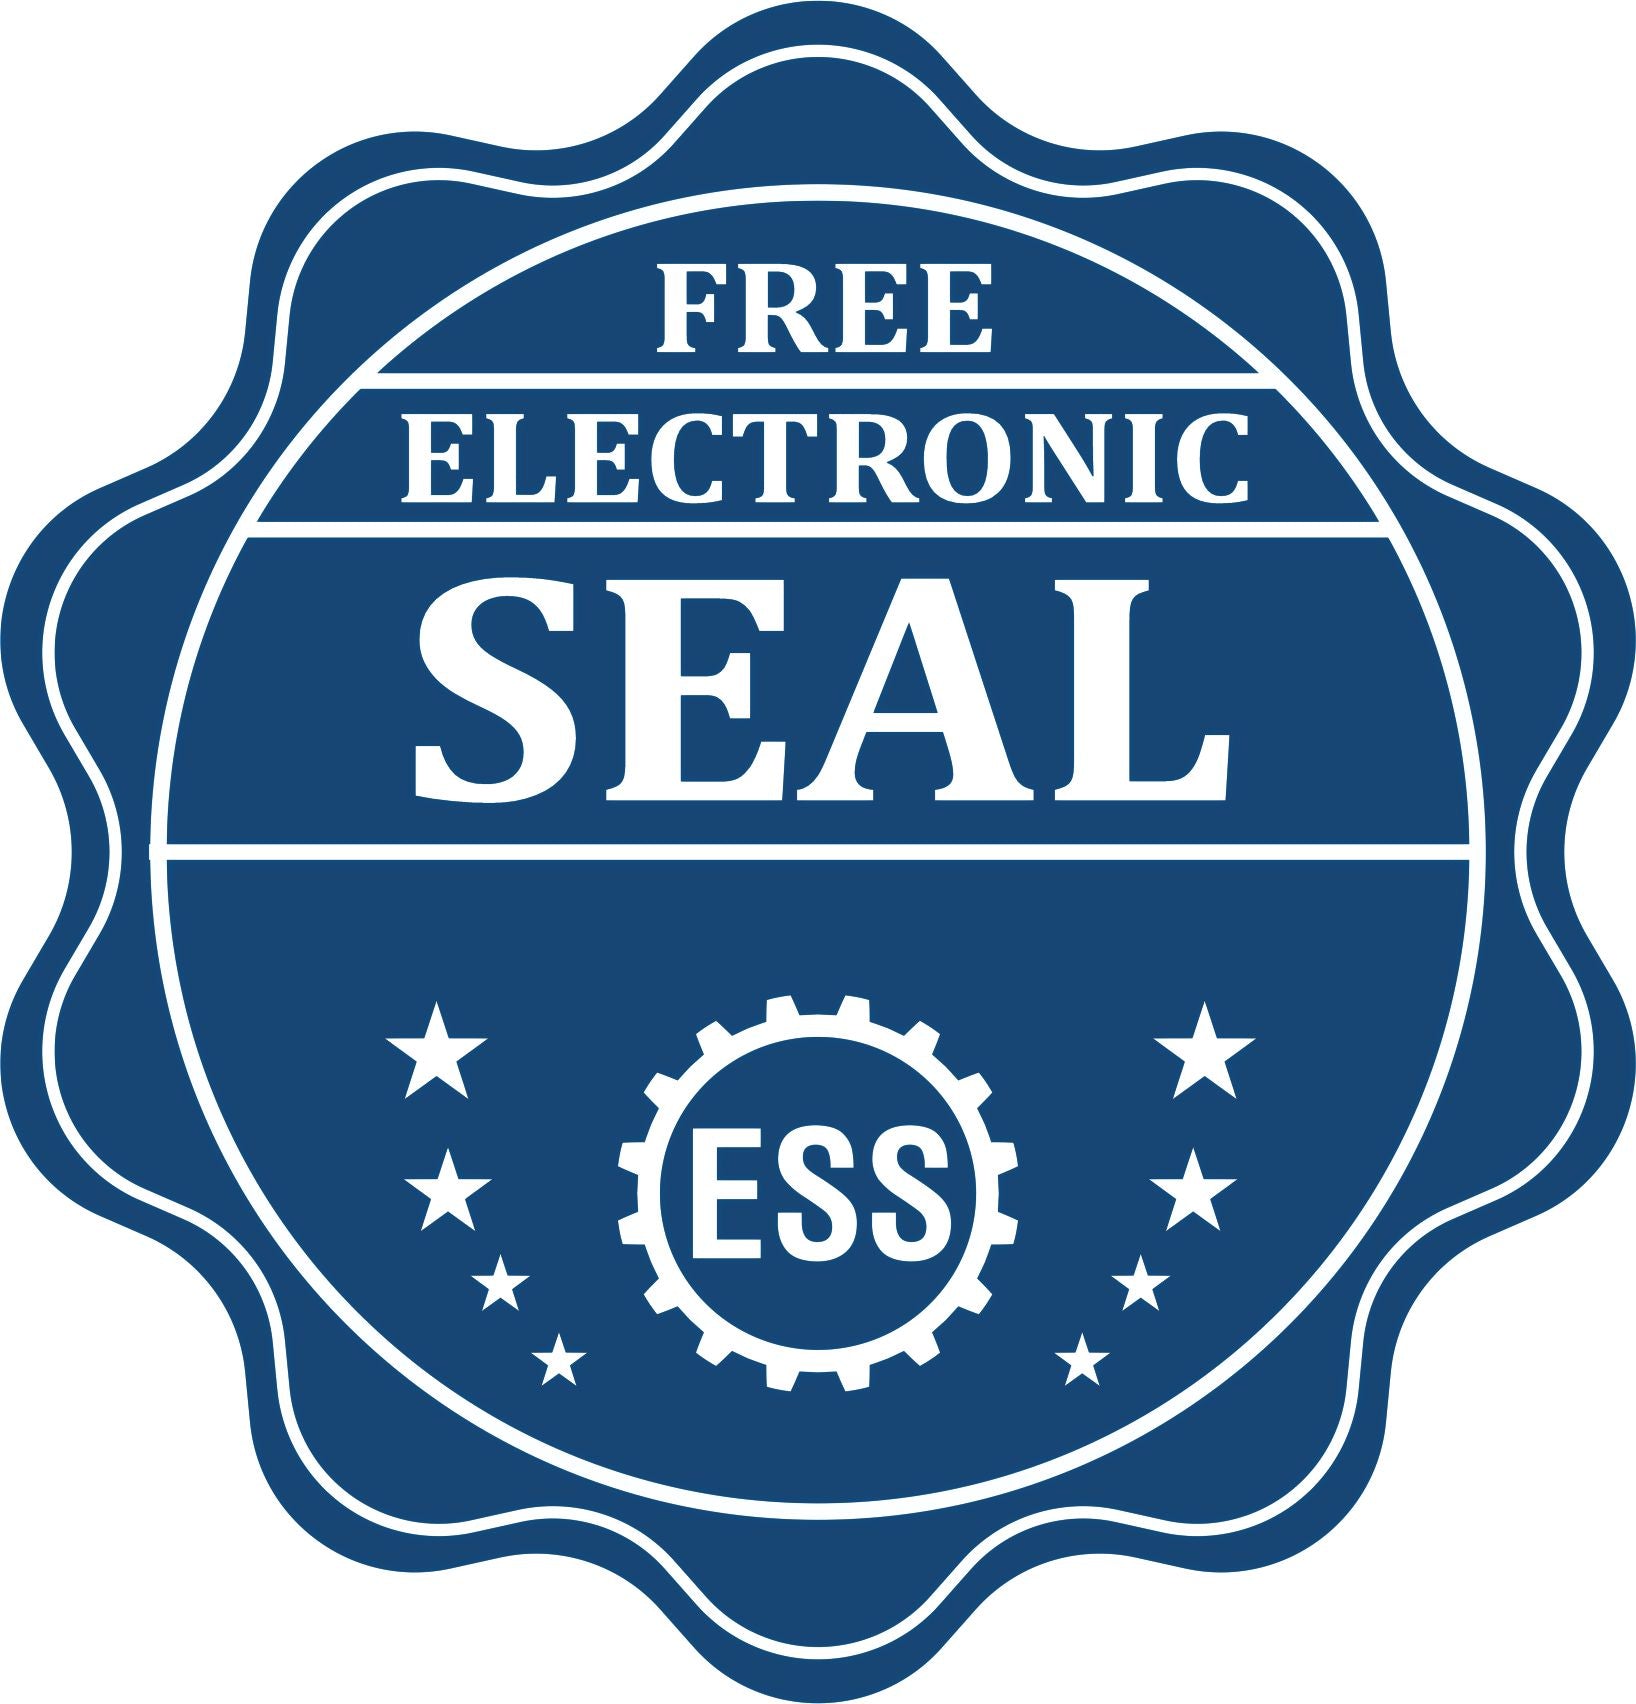 A badge showing a free electronic seal for the Kansas Professional Engineer Seal Stamp with stars and the ESS gear on the emblem.